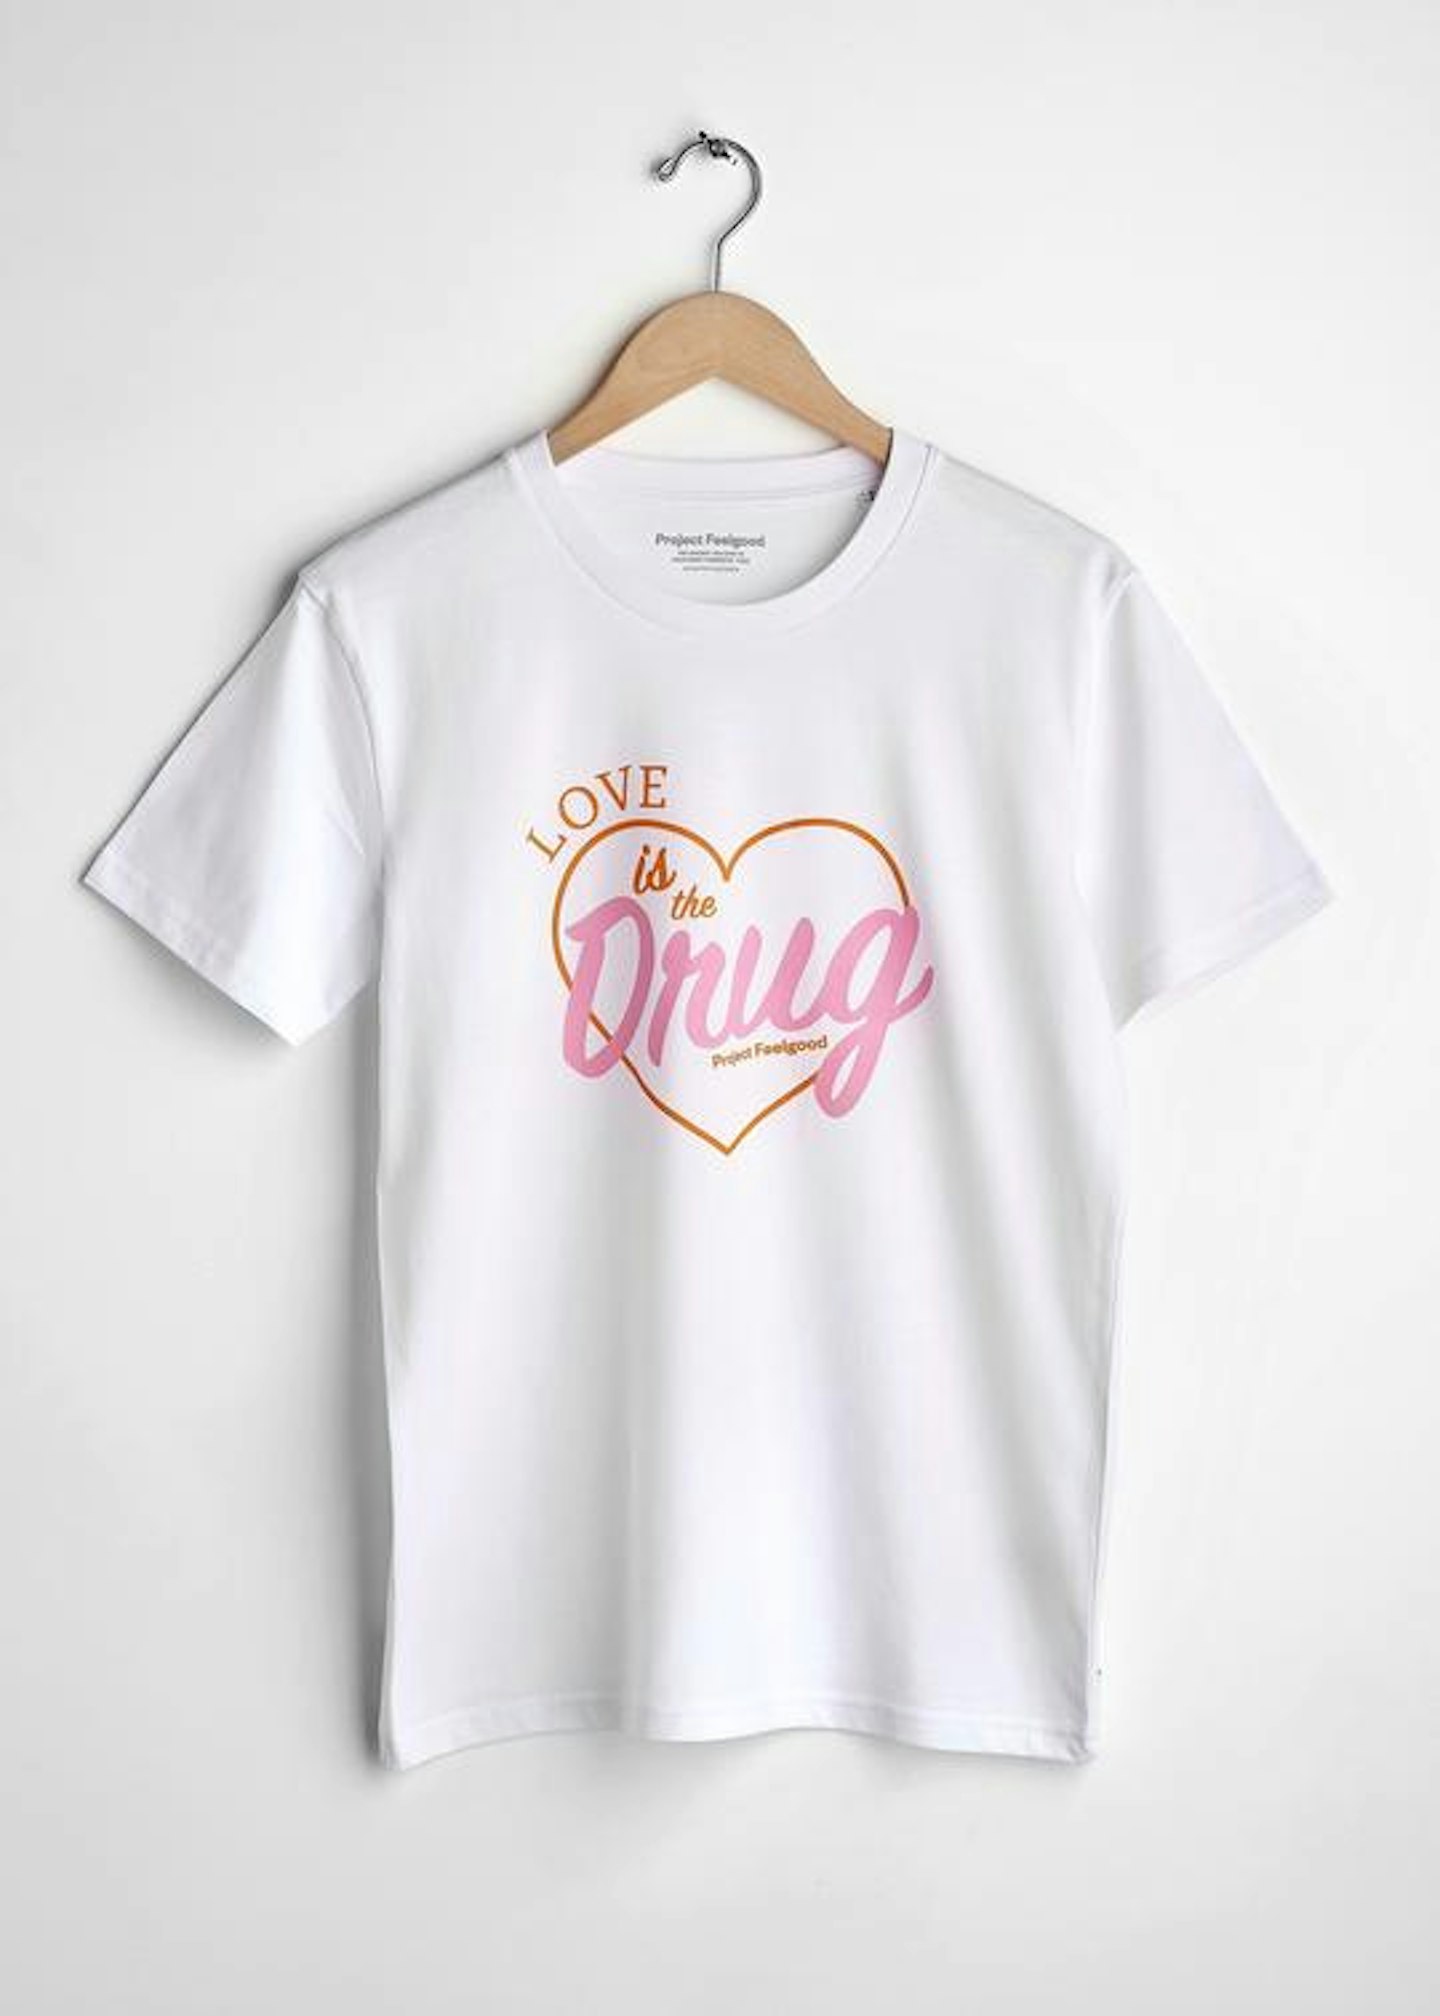 Project Feelgood, Love Is The Drug Tee, £25